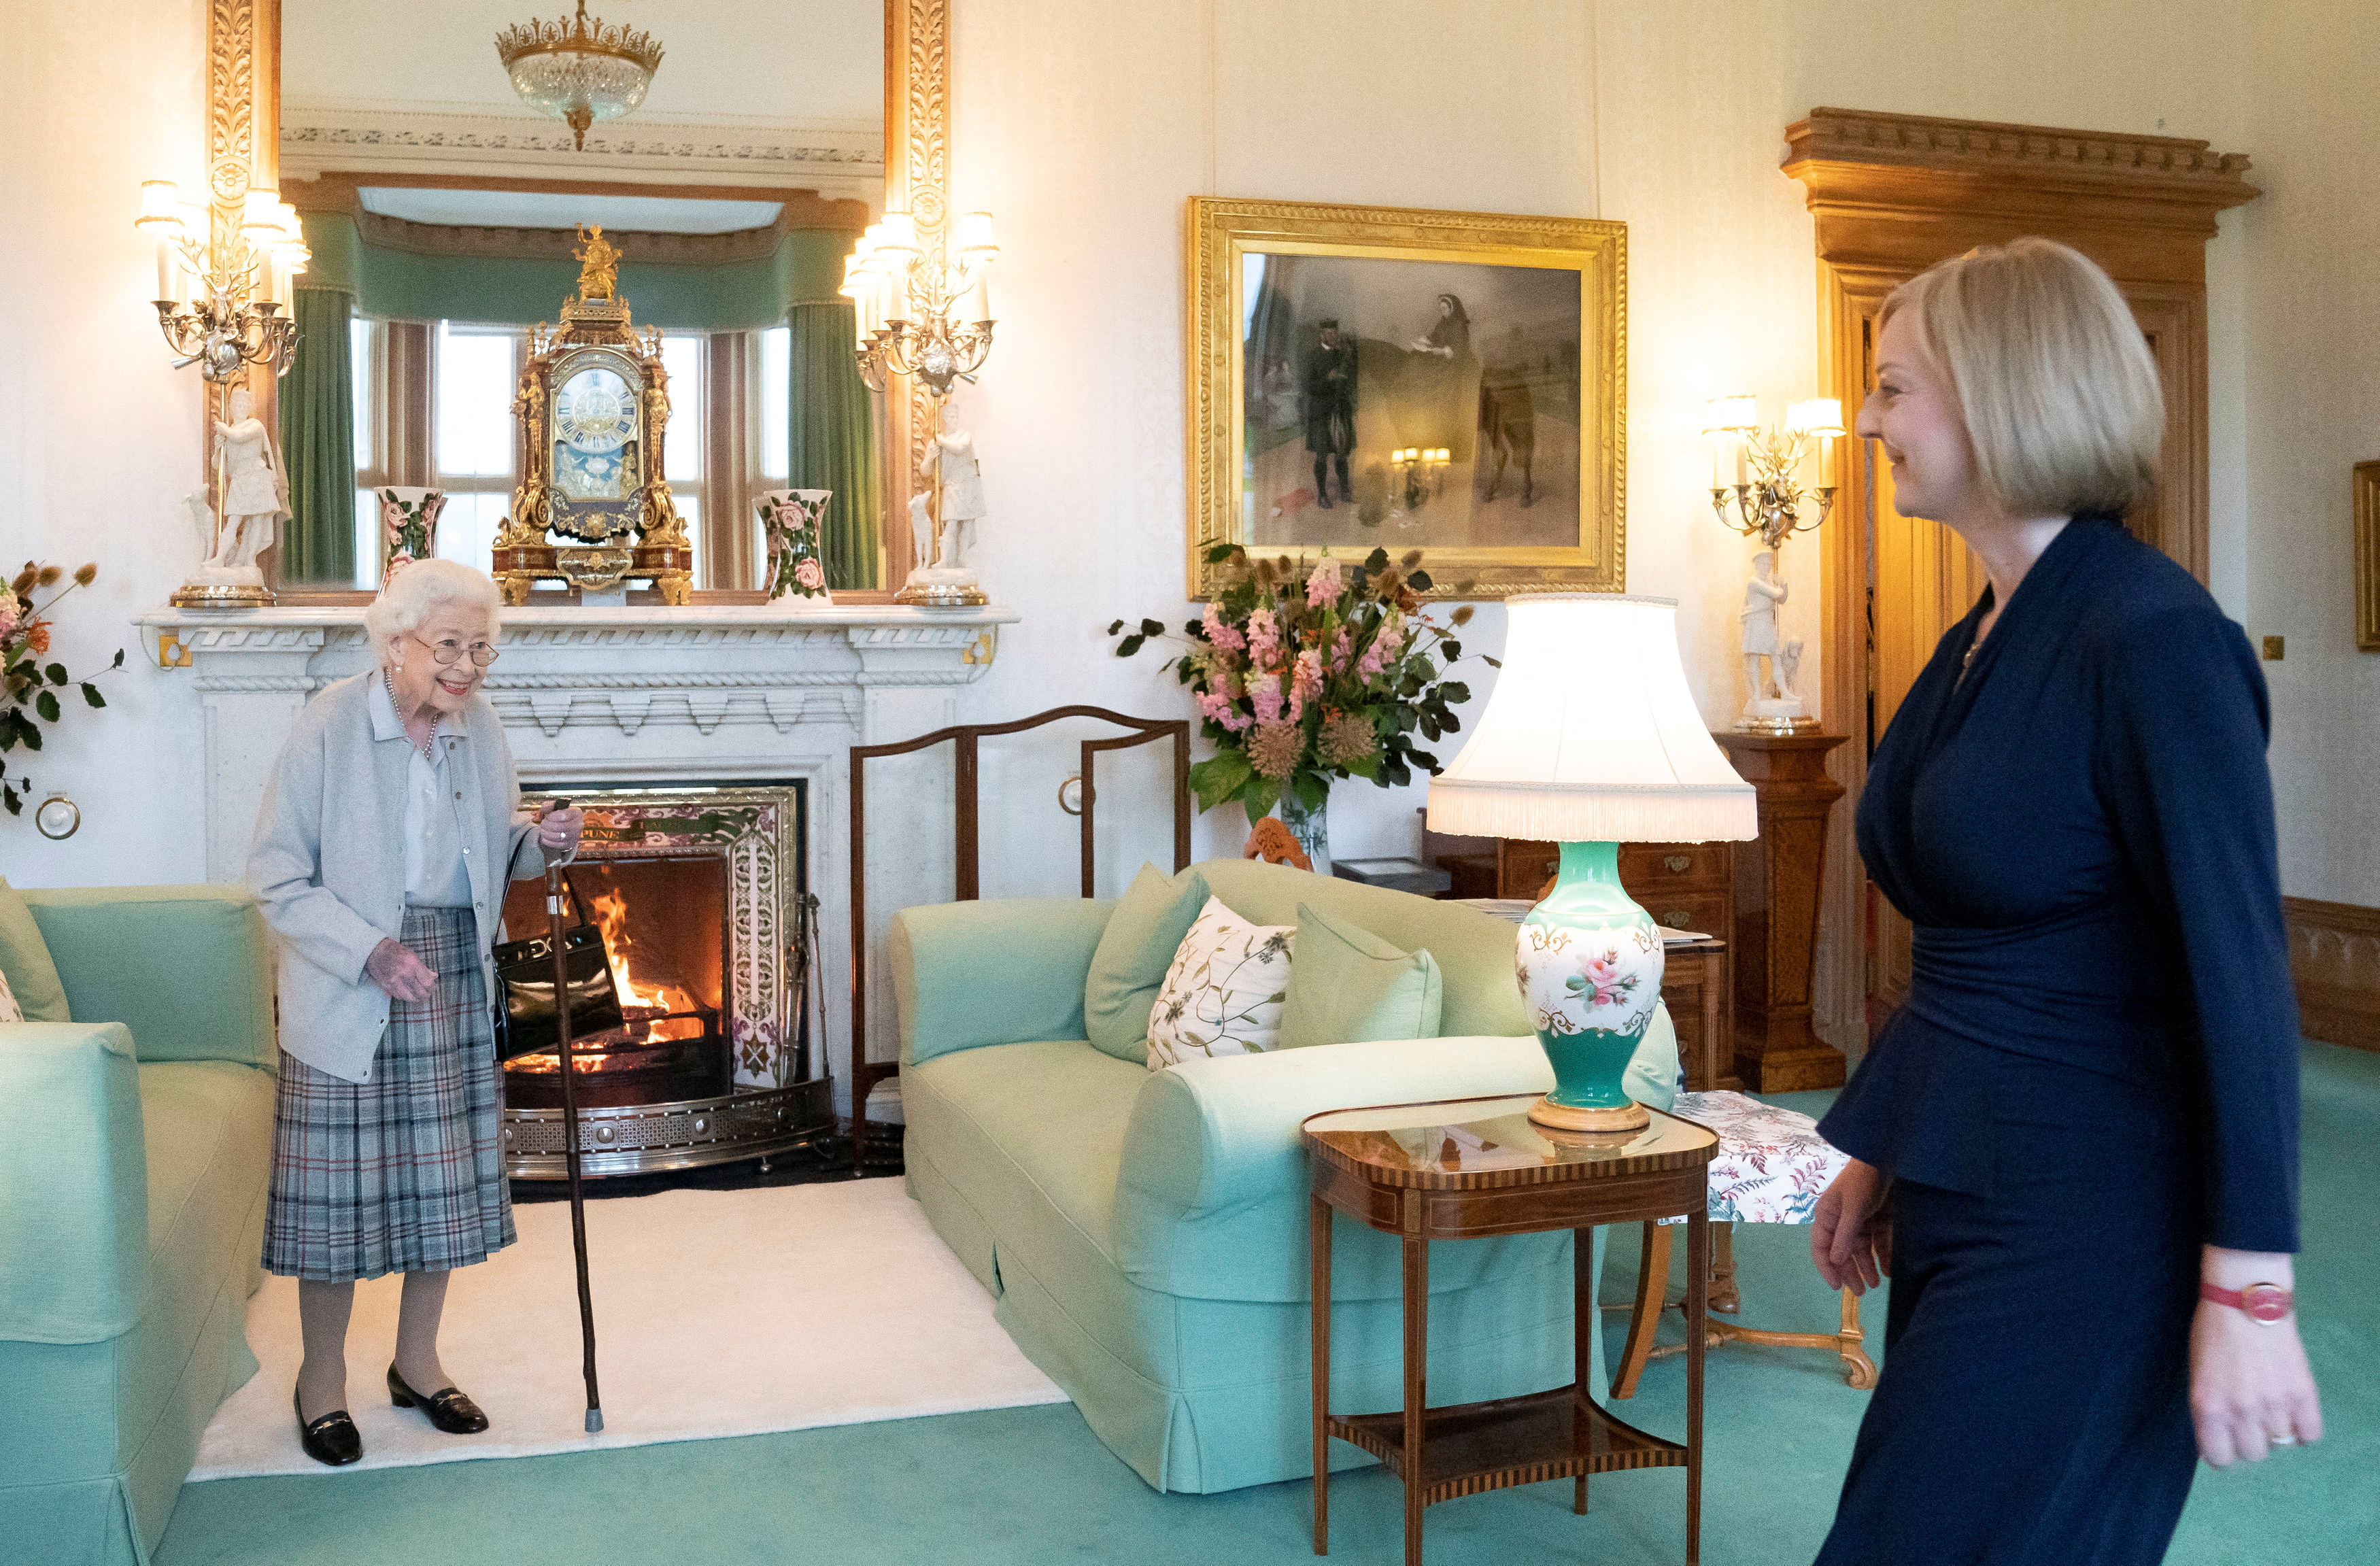 The moment Queen Elizabeth II welcomed the new British prime minister was the last official appearance of the monarch / Jane Barlow / Poole via REUTERS.